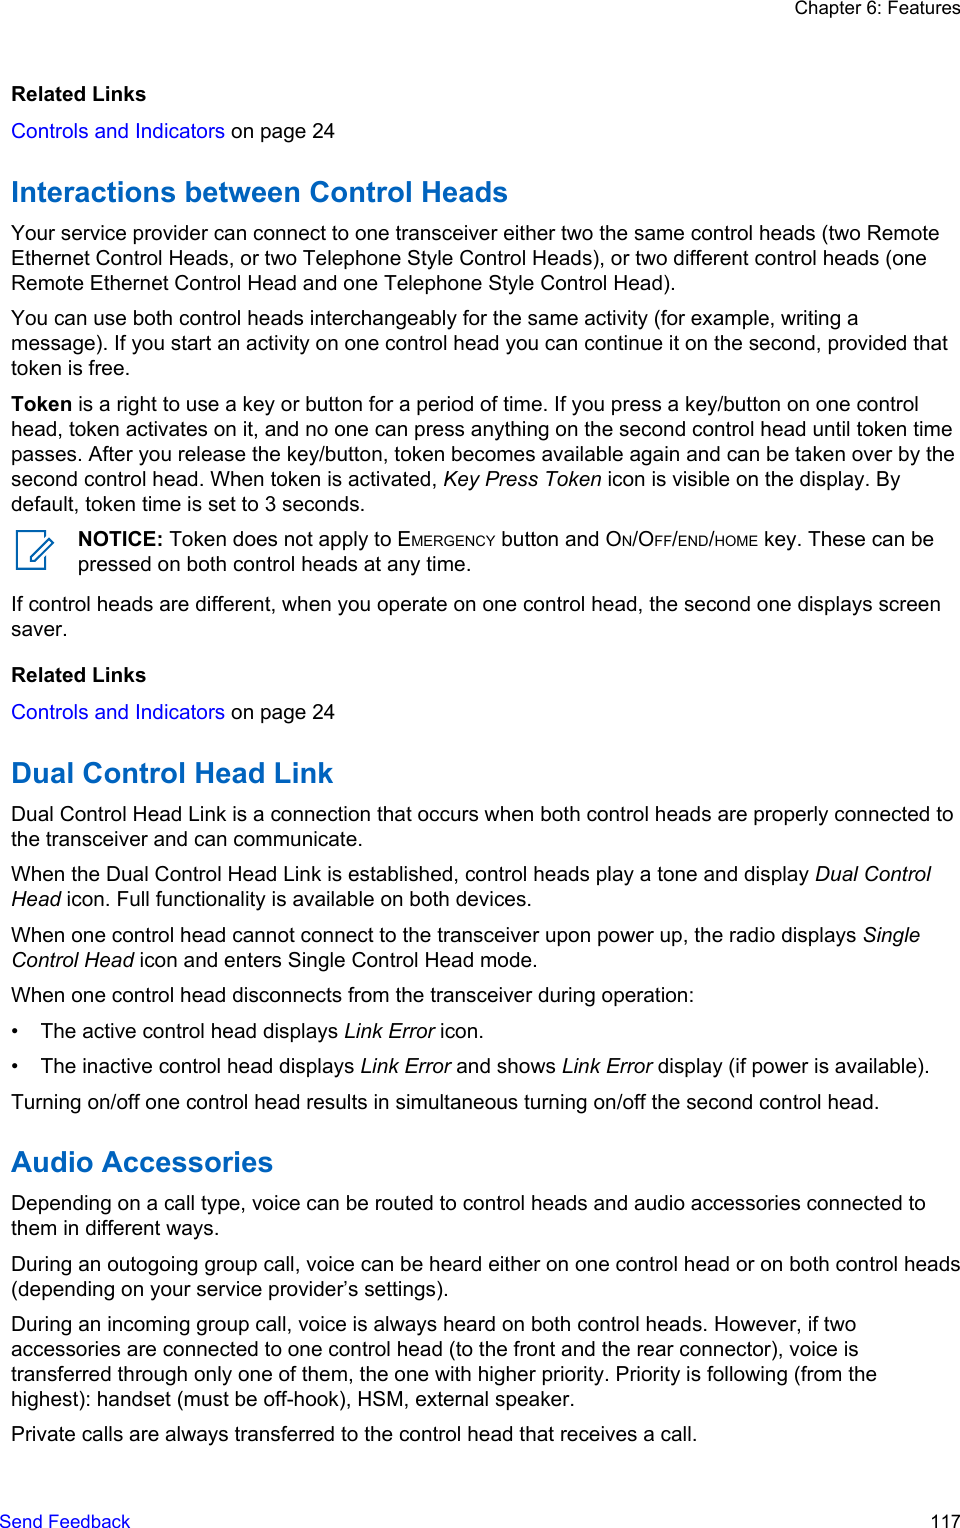 Related LinksControls and Indicators on page 24Interactions between Control HeadsYour service provider can connect to one transceiver either two the same control heads (two RemoteEthernet Control Heads, or two Telephone Style Control Heads), or two different control heads (oneRemote Ethernet Control Head and one Telephone Style Control Head).You can use both control heads interchangeably for the same activity (for example, writing amessage). If you start an activity on one control head you can continue it on the second, provided thattoken is free.Token is a right to use a key or button for a period of time. If you press a key/button on one controlhead, token activates on it, and no one can press anything on the second control head until token timepasses. After you release the key/button, token becomes available again and can be taken over by thesecond control head. When token is activated, Key Press Token icon is visible on the display. Bydefault, token time is set to 3 seconds.NOTICE: Token does not apply to EMERGENCY button and ON/OFF/END/HOME key. These can bepressed on both control heads at any time.If control heads are different, when you operate on one control head, the second one displays screensaver.Related LinksControls and Indicators on page 24Dual Control Head LinkDual Control Head Link is a connection that occurs when both control heads are properly connected tothe transceiver and can communicate.When the Dual Control Head Link is established, control heads play a tone and display Dual ControlHead icon. Full functionality is available on both devices.When one control head cannot connect to the transceiver upon power up, the radio displays SingleControl Head icon and enters Single Control Head mode.When one control head disconnects from the transceiver during operation:• The active control head displays Link Error icon.• The inactive control head displays Link Error and shows Link Error display (if power is available).Turning on/off one control head results in simultaneous turning on/off the second control head.Audio AccessoriesDepending on a call type, voice can be routed to control heads and audio accessories connected tothem in different ways.During an outogoing group call, voice can be heard either on one control head or on both control heads(depending on your service provider’s settings).During an incoming group call, voice is always heard on both control heads. However, if twoaccessories are connected to one control head (to the front and the rear connector), voice istransferred through only one of them, the one with higher priority. Priority is following (from thehighest): handset (must be off-hook), HSM, external speaker.Private calls are always transferred to the control head that receives a call.Chapter 6: FeaturesSend Feedback   117